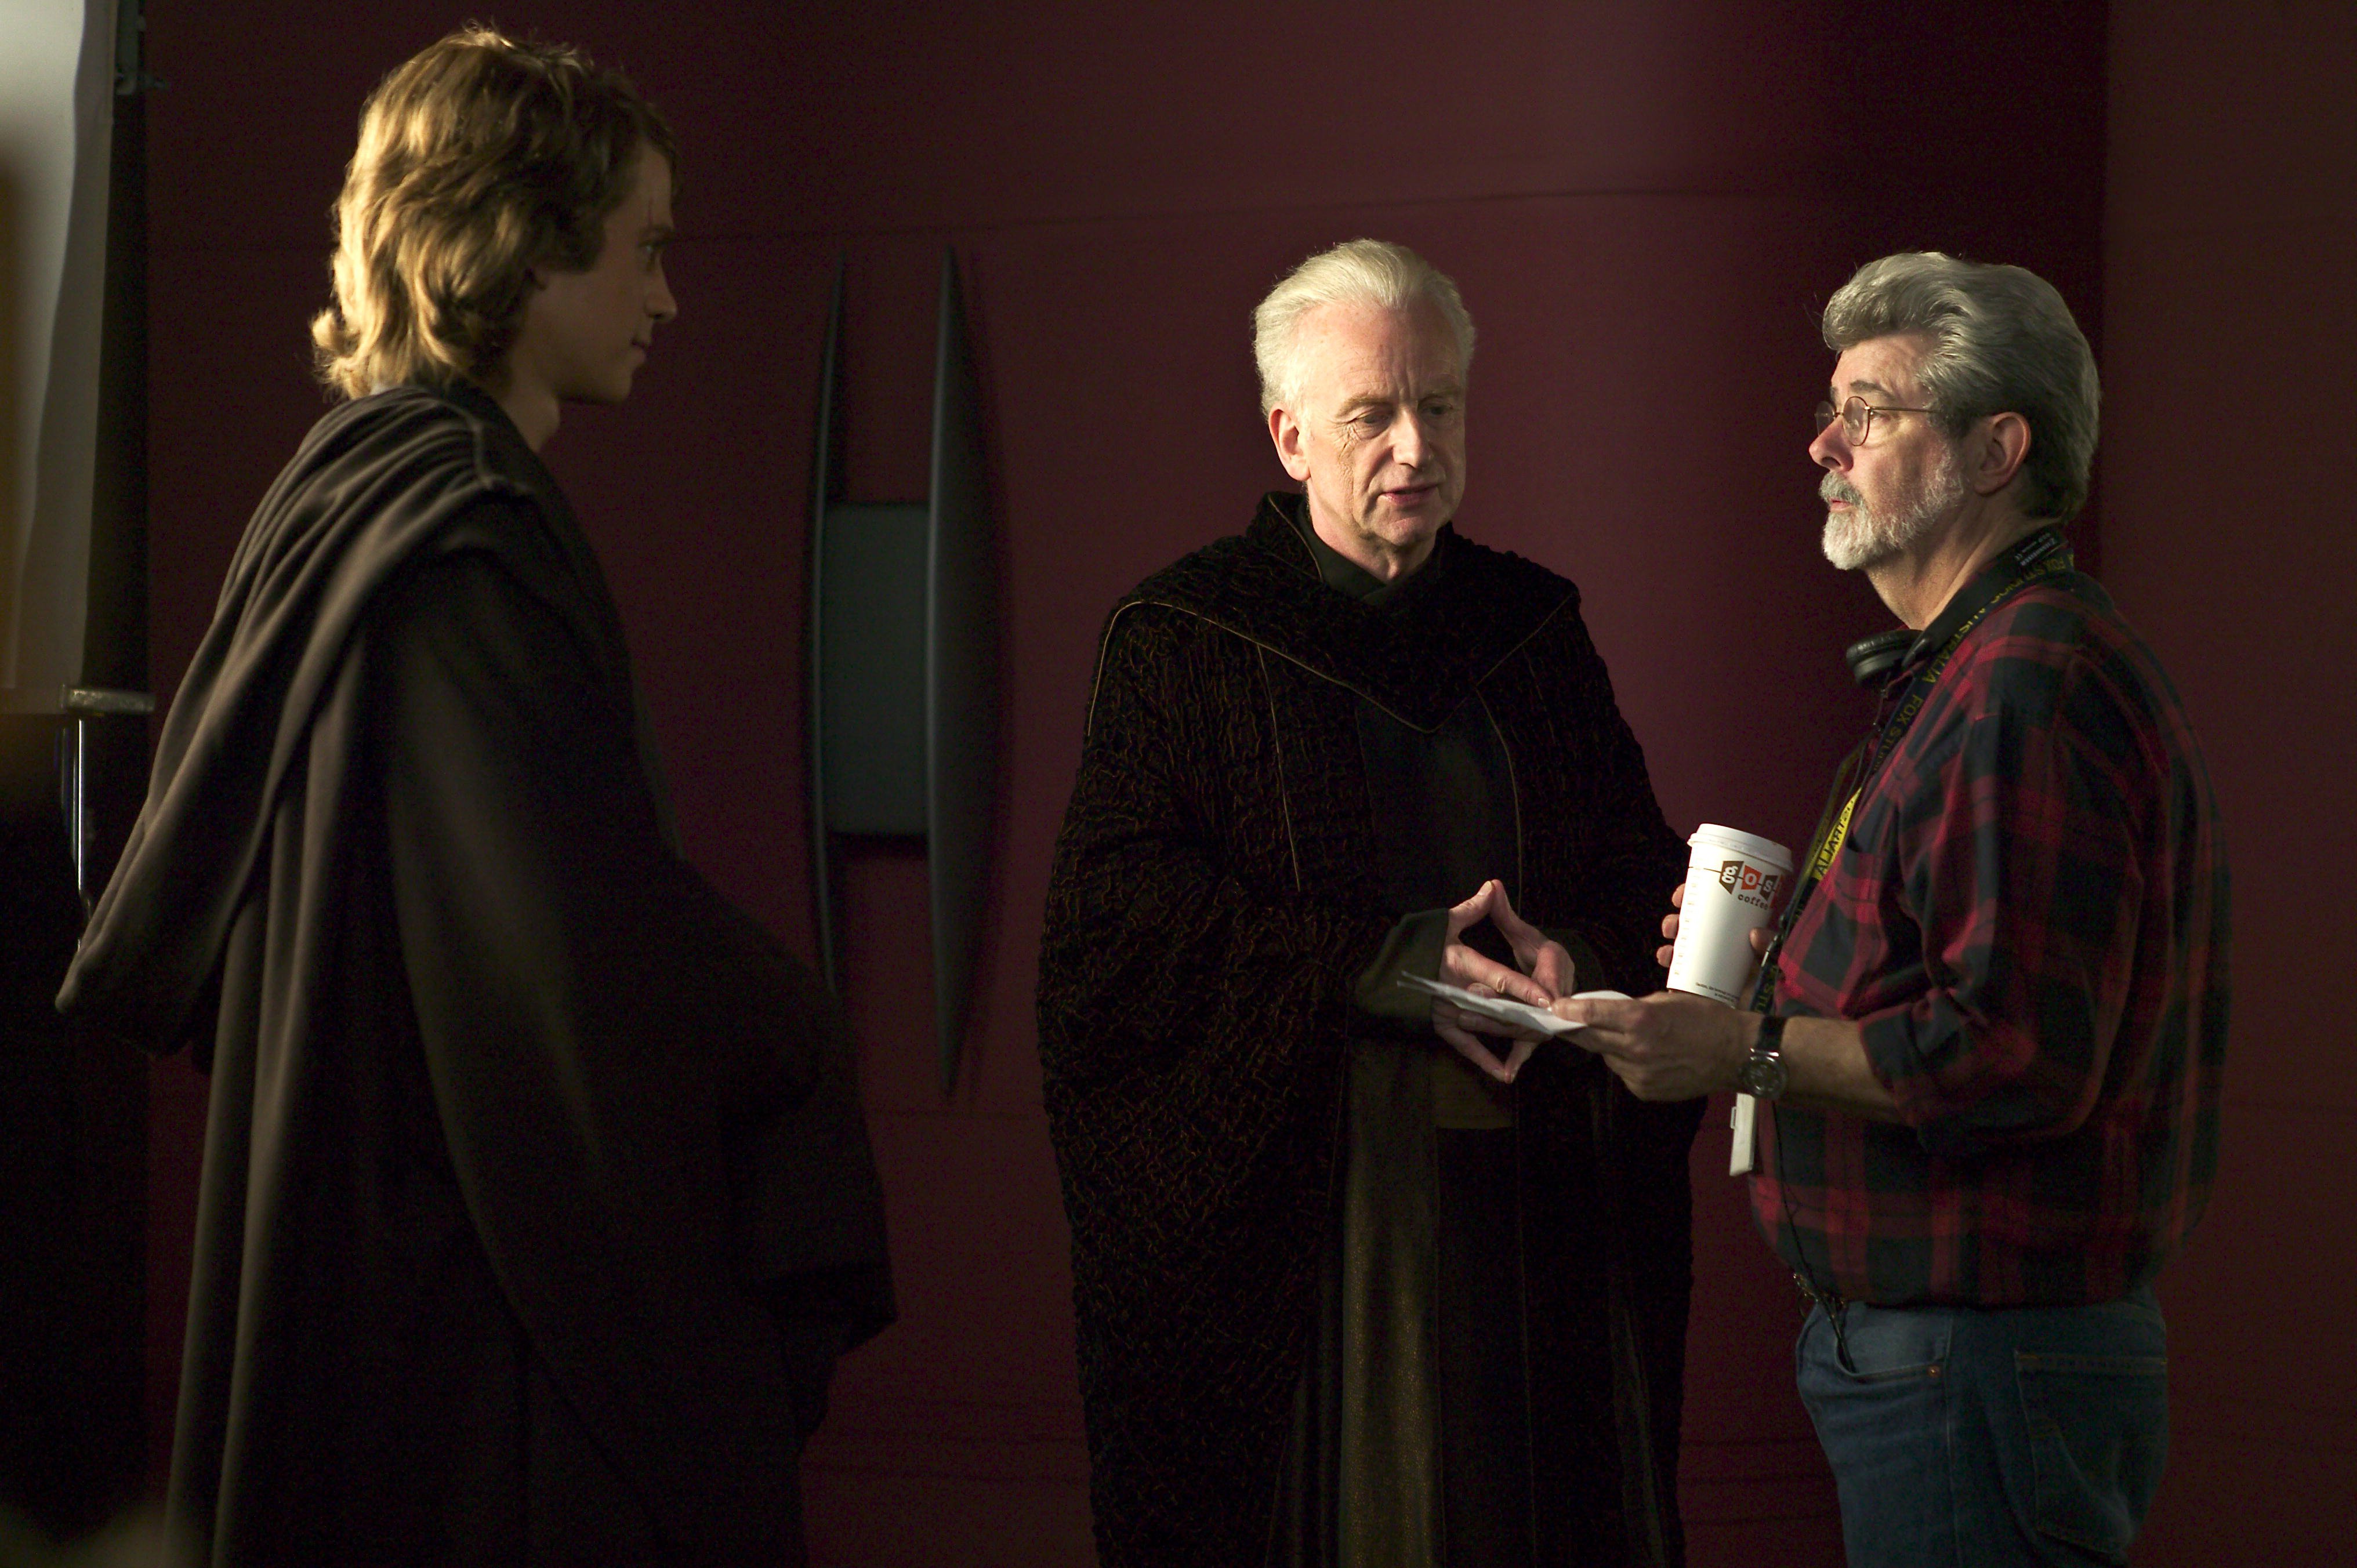 Actors Hayden Christensen (Anakin Skywalker) and Ian McDiarmid (Supreme Chancellor Palpatine) discuss a major scene in the Supreme Chancellor's office with director George Lucas. Photo by Merrick Morton.TM & © 2005 Lucasfilm Ltd. All Rights Reserved. Photo by Merrick Morton.